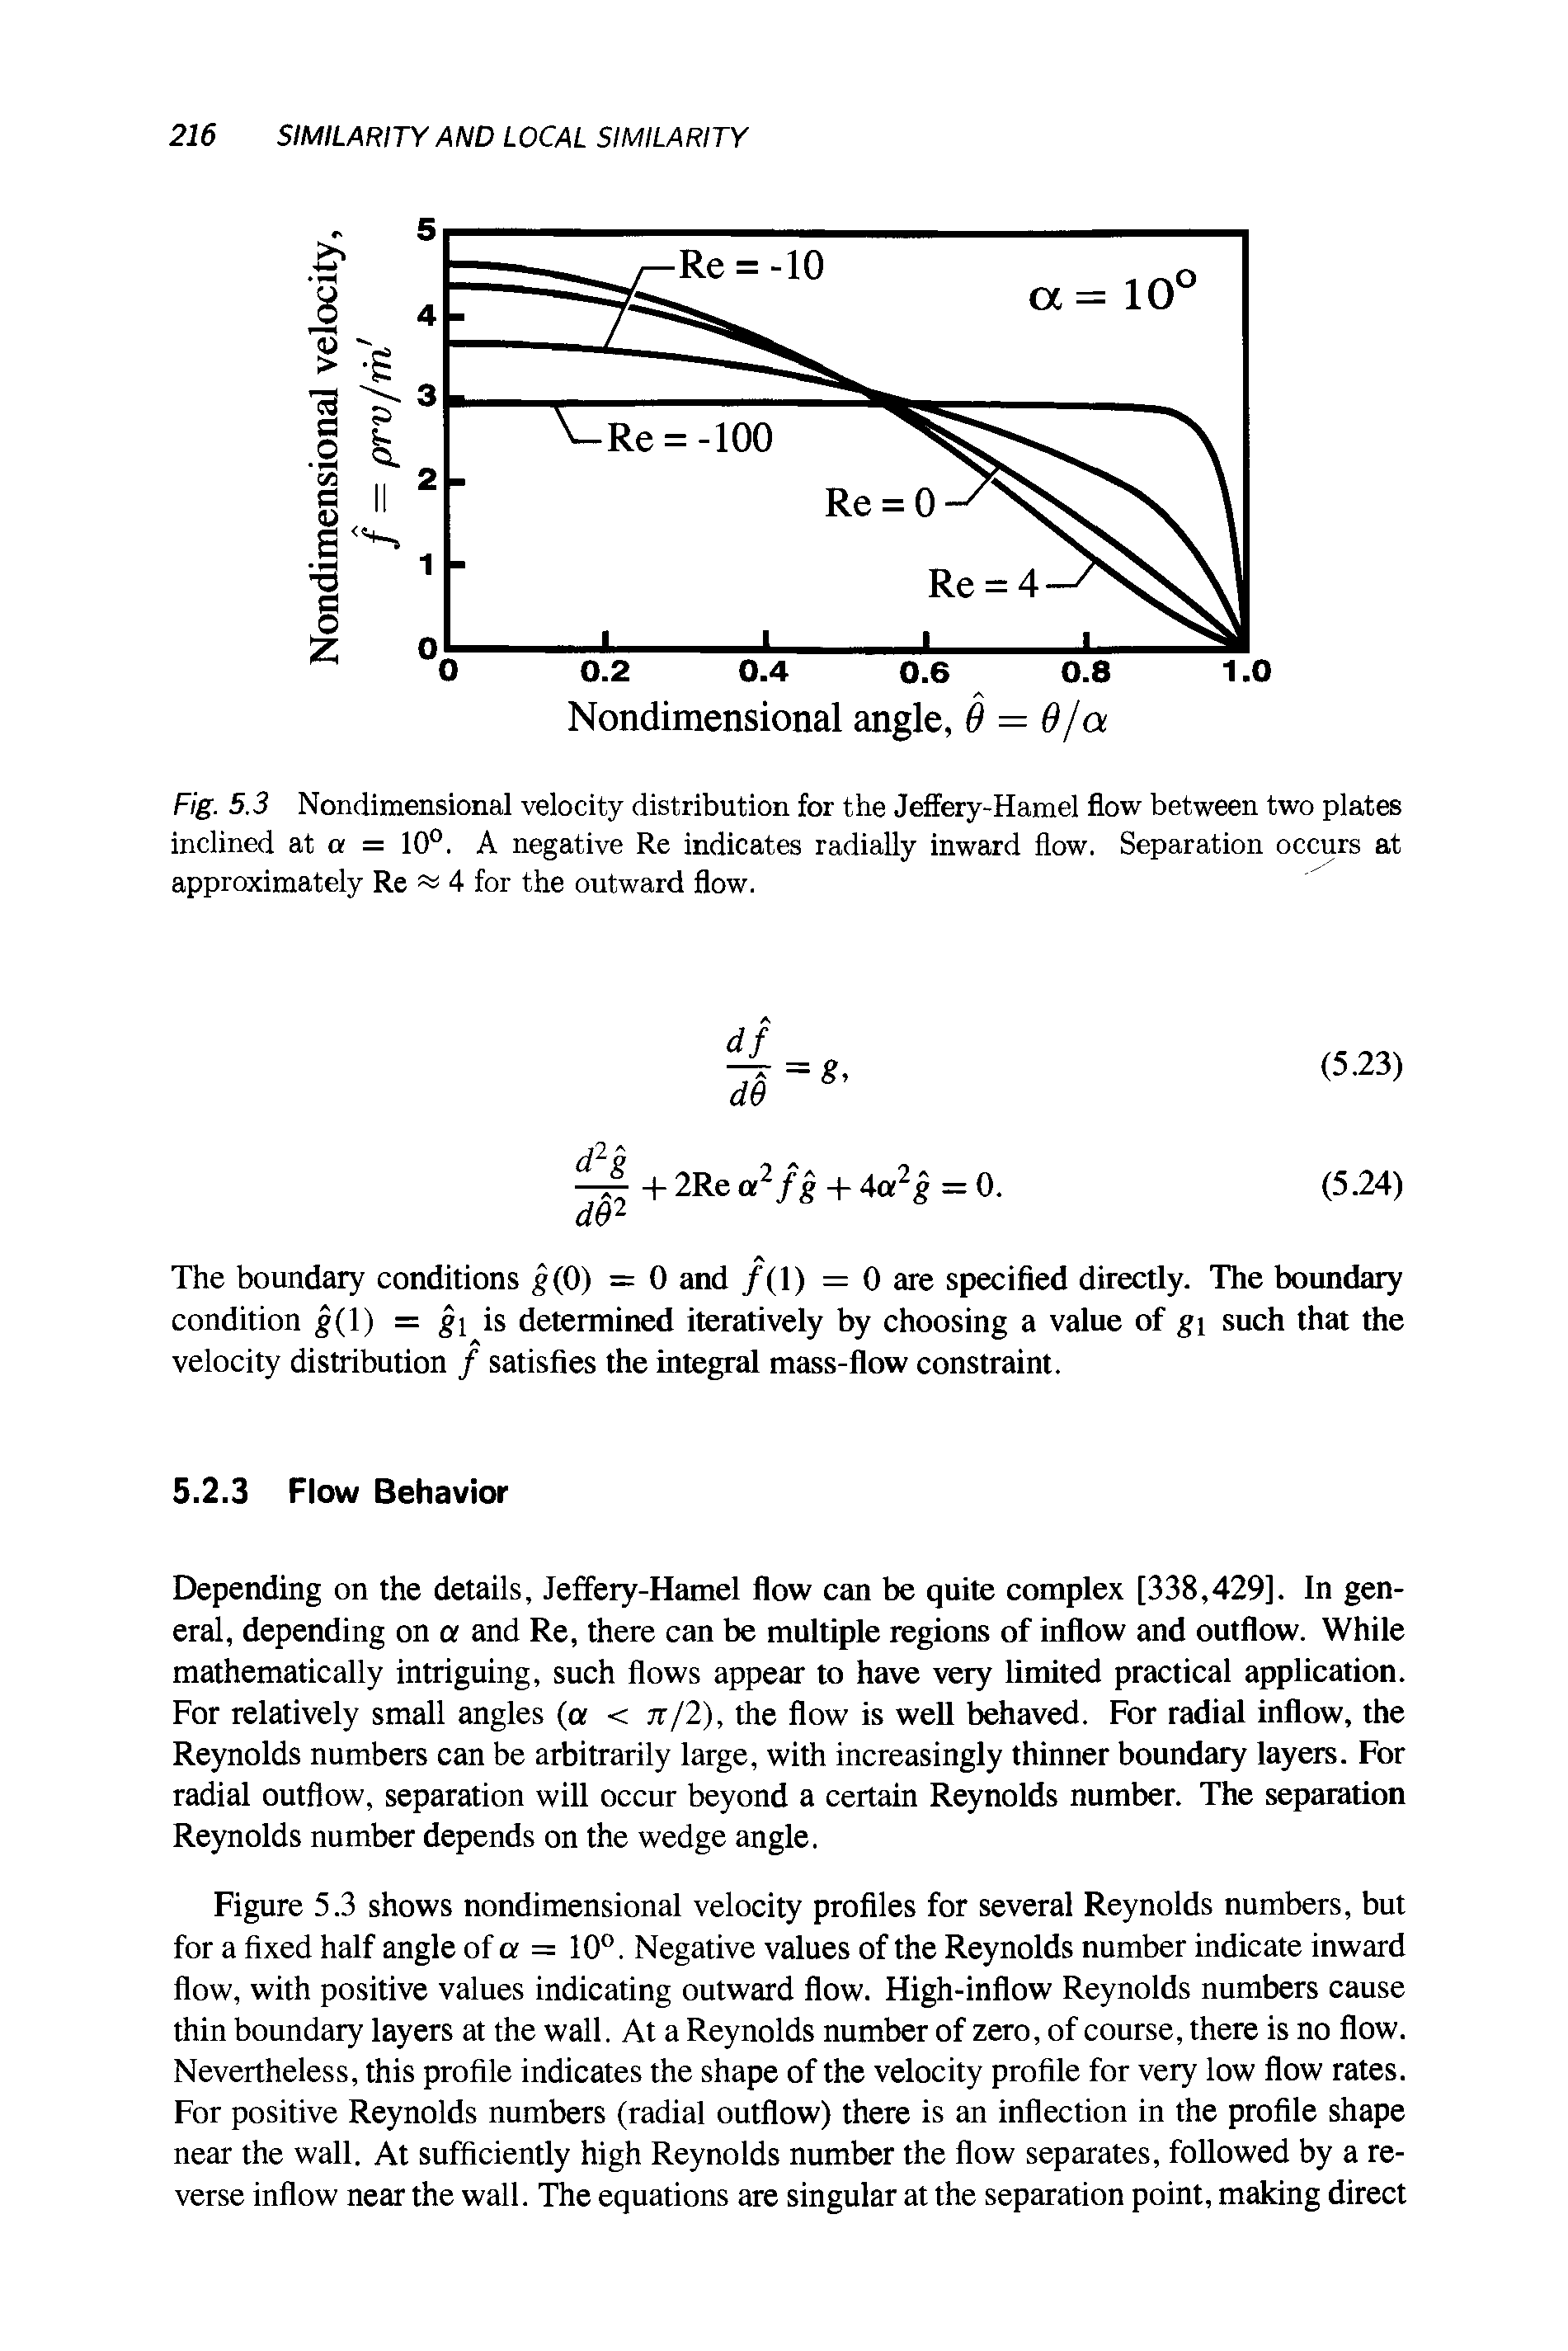 Fig. 5.3 Nondimensional velocity distribution for the Jeffery-Hamel flow between two plates inclined at a = 10°. A negative Re indicates radially inward flow. Separation occurs at approximately Re 4 for the outward flow.